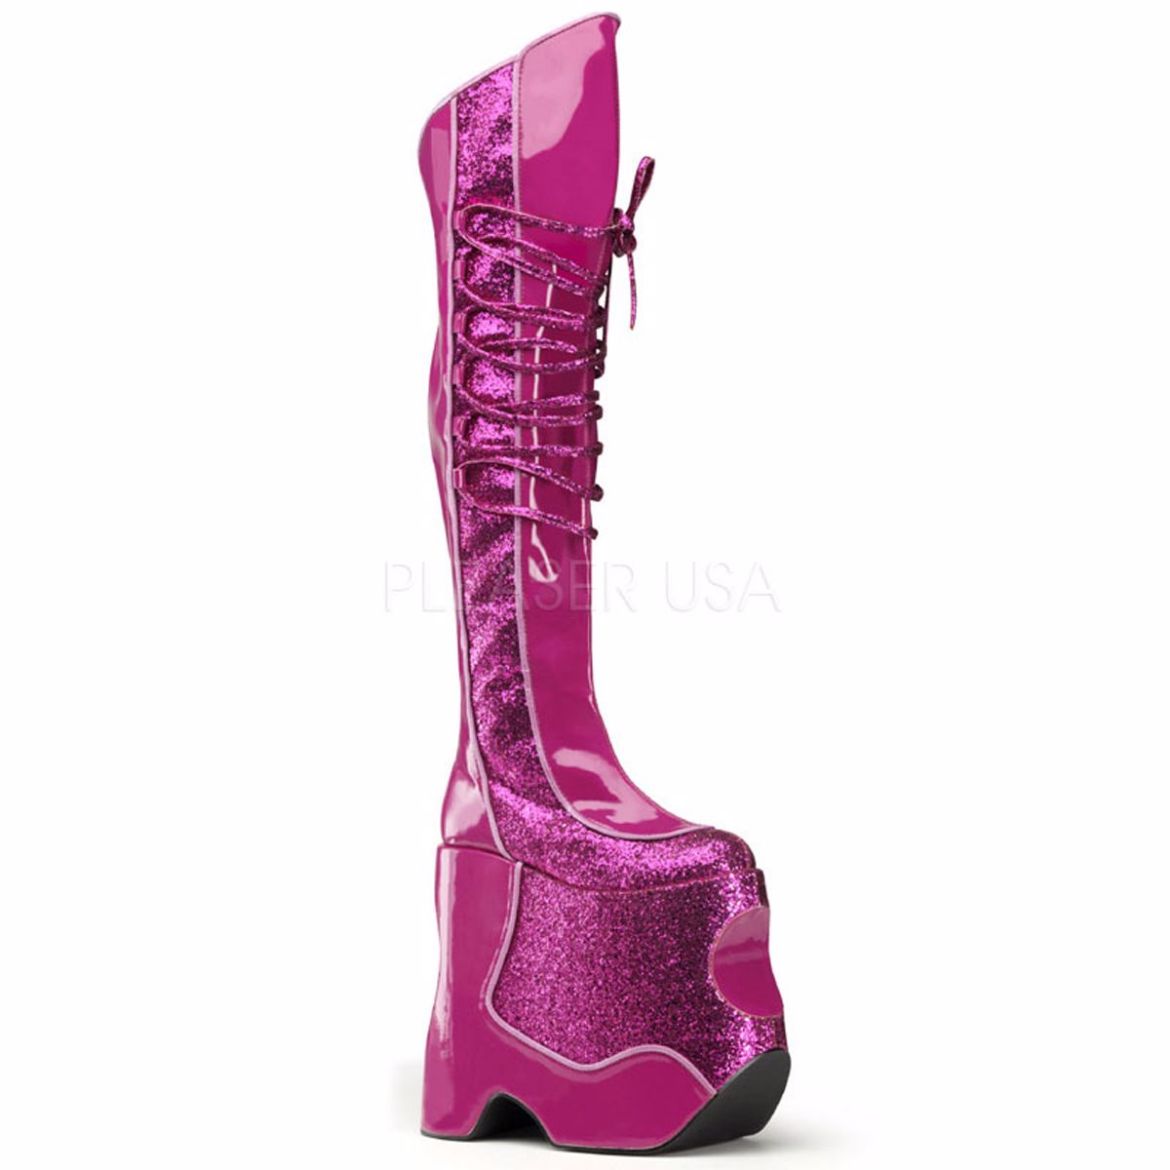 Product image of Pleaser Pink Label Fabulous-3035 Hot Pink Crinkle Patent-Gltr, 8 3/4 inch (22.2 cm) Heel, 8 1/4 inch (21 cm) Platform Thigh High Boot